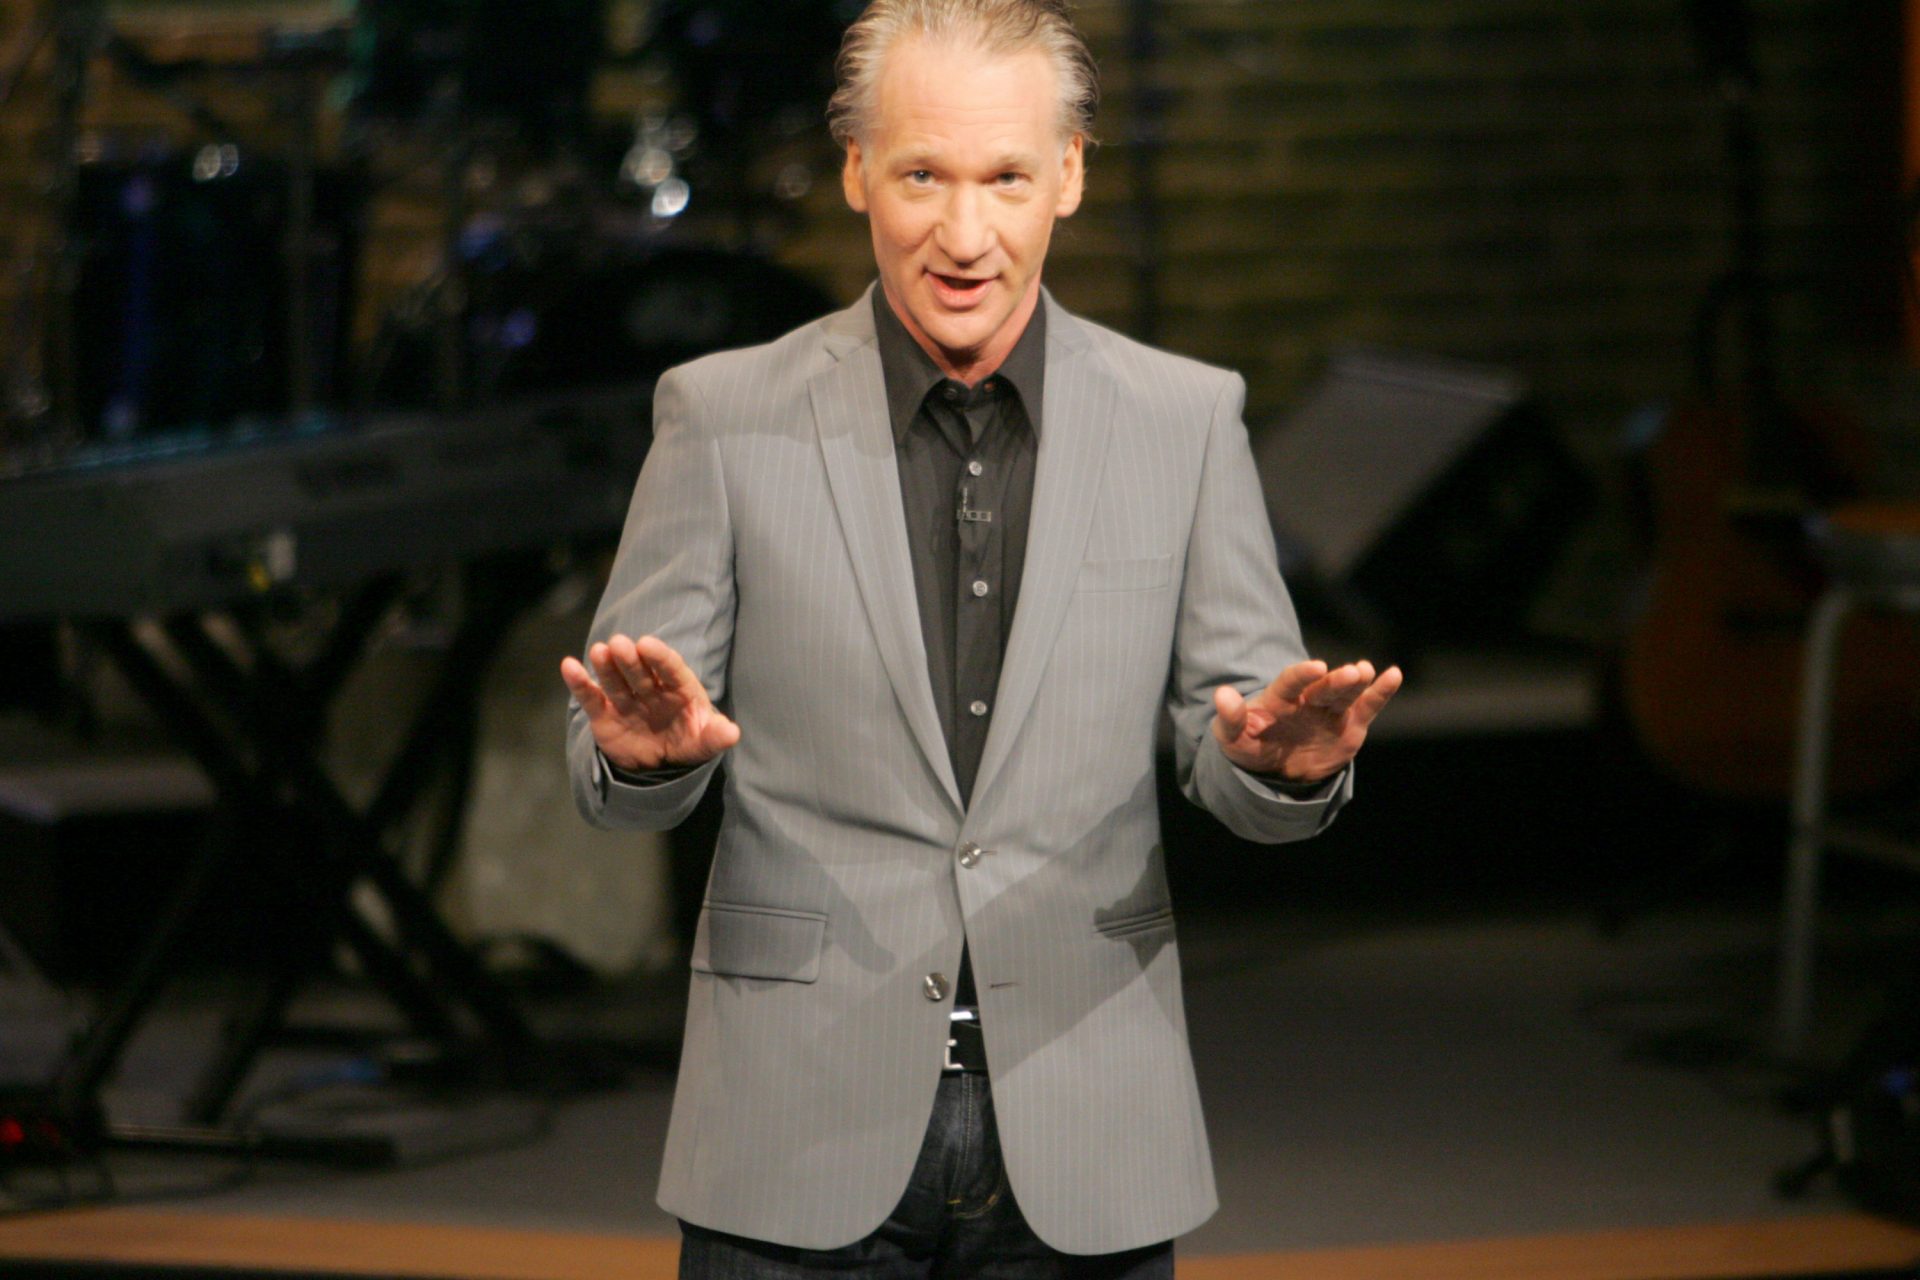 Bill Maher coming back on Friday